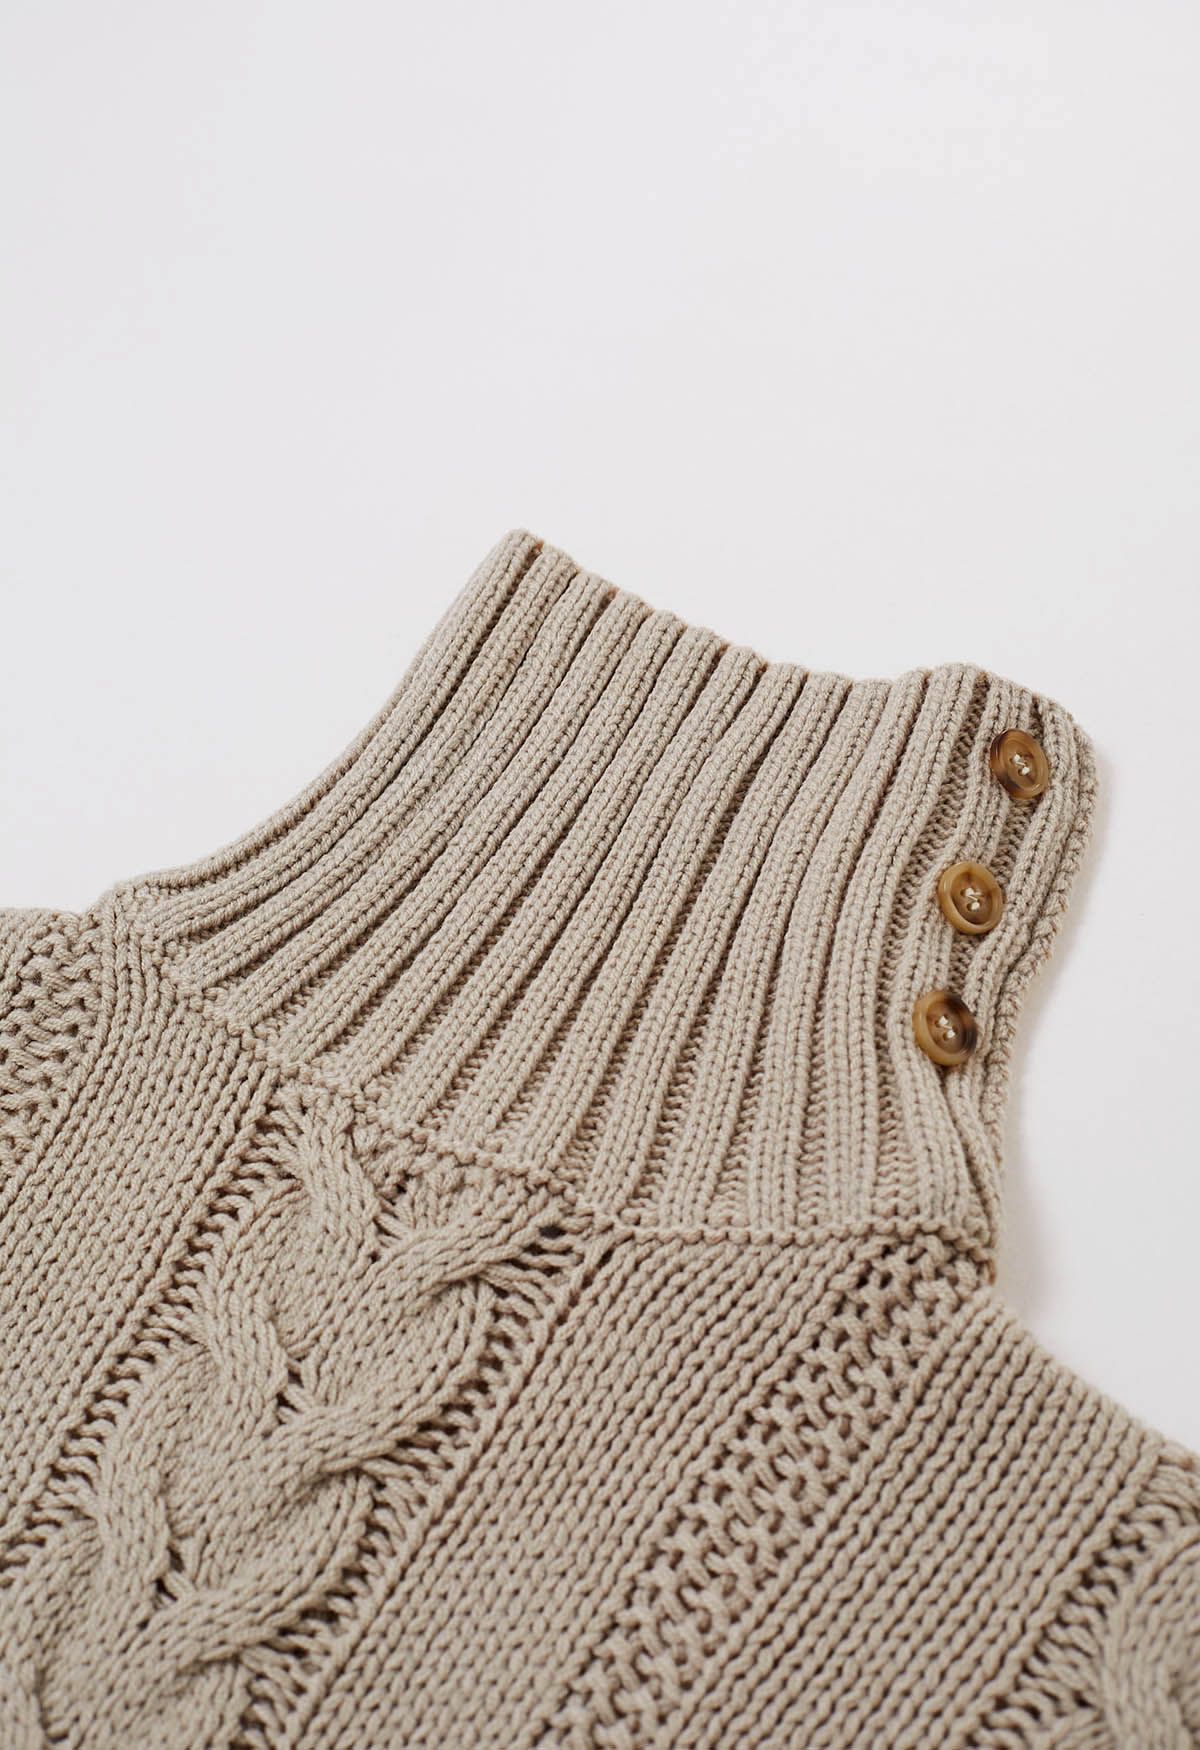 Side Button Cowl Neck Cable Knit Sweater in Light Tan